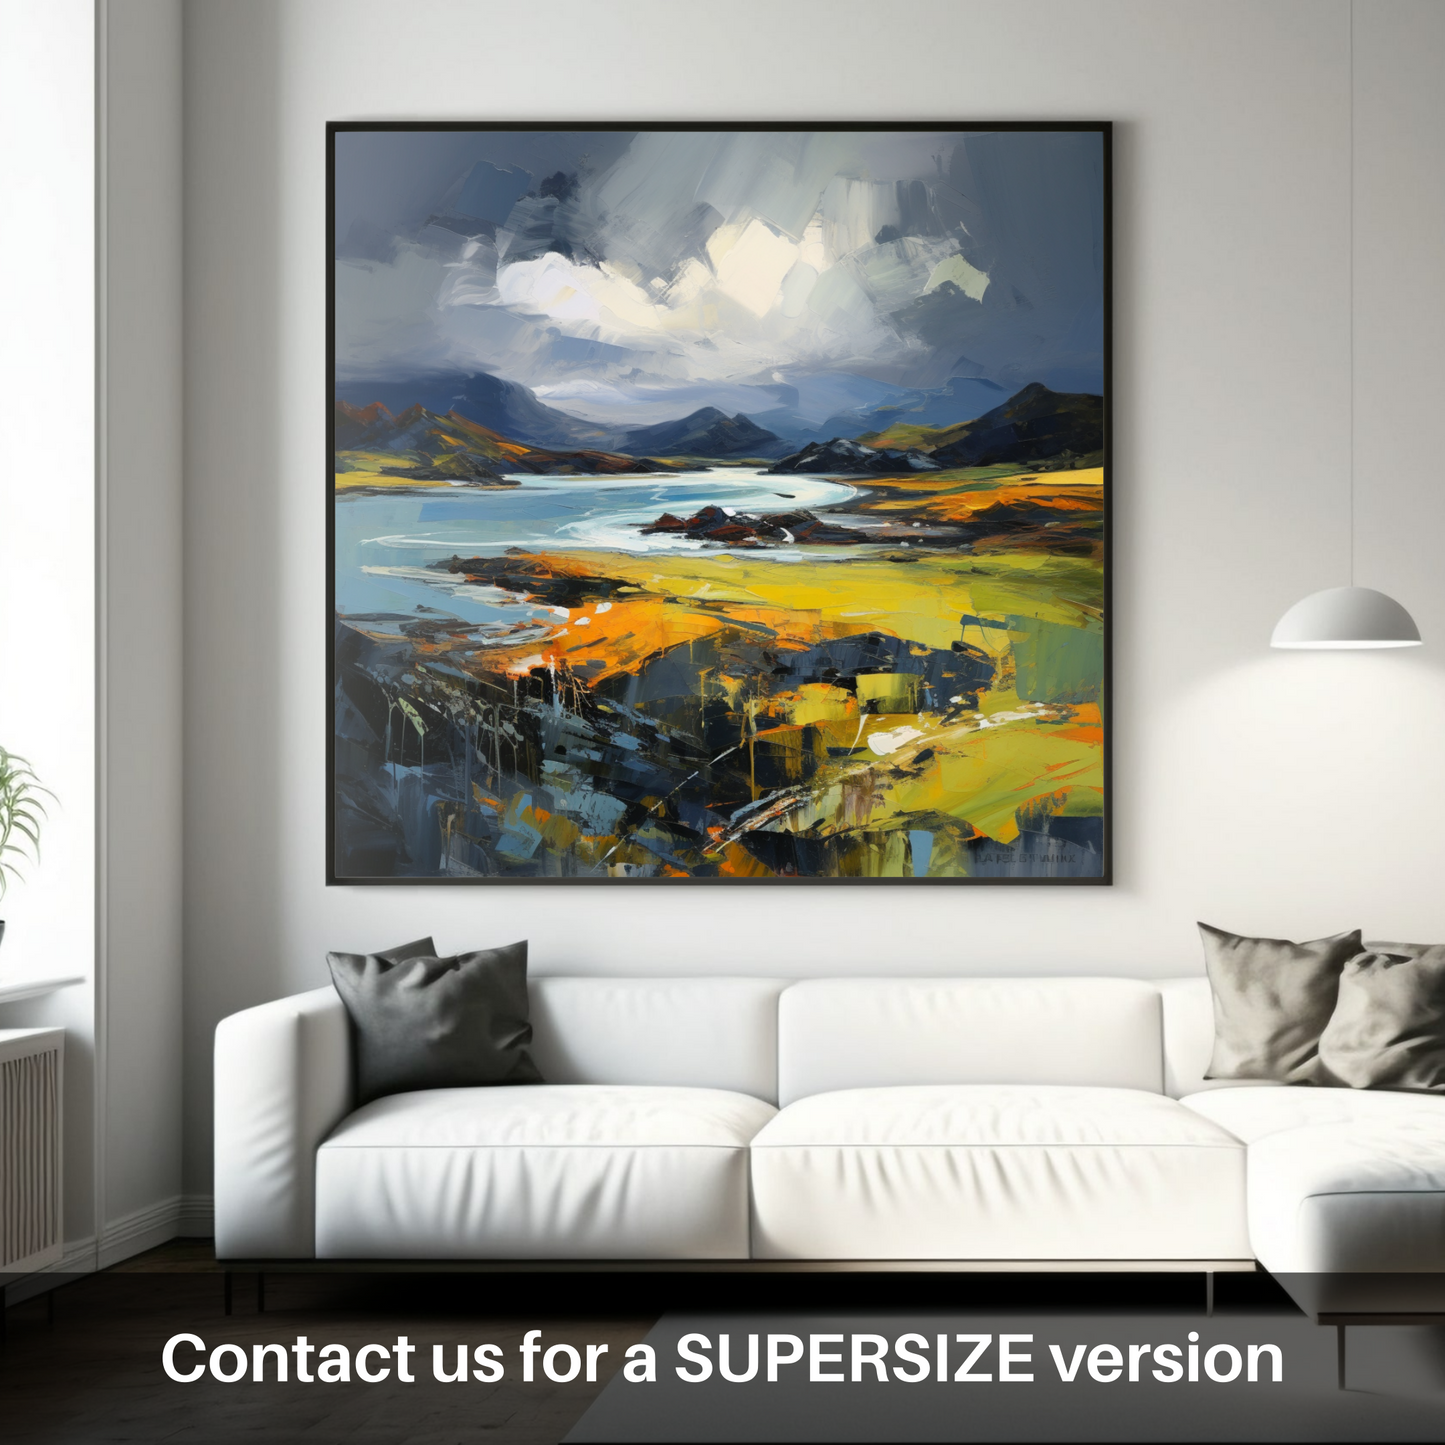 Huge supersize print of Easdale Sound with a stormy sky